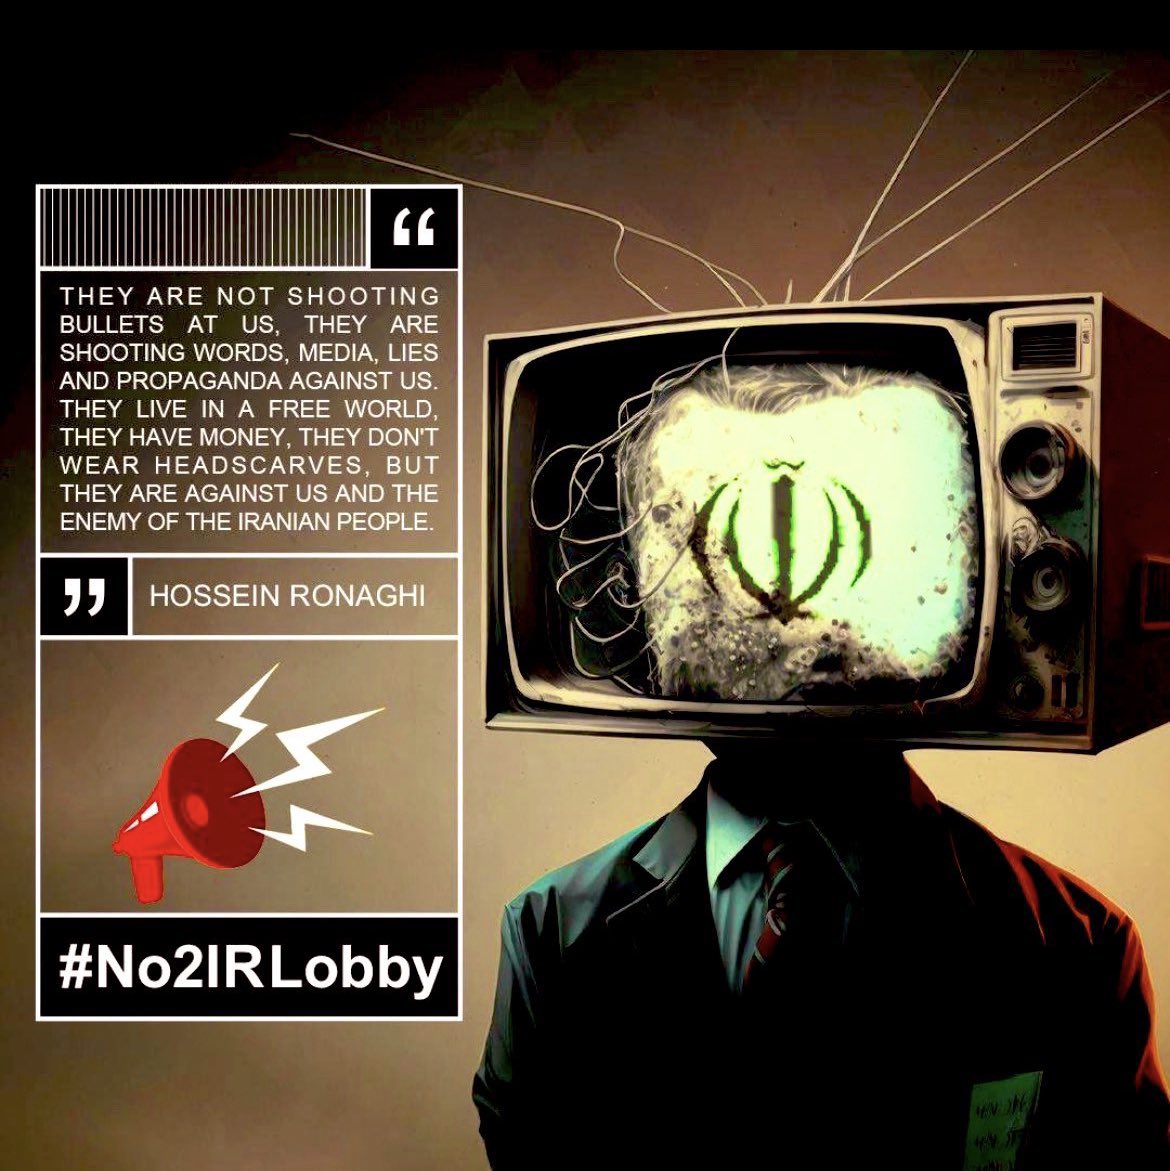 Any organization or individual that promotes any form of deals, nuclear or otherwise, with Iran’s terror regime, while pretending to represent public affairs of Iranian Americans with their fake surveys, is in reality lobbying for the interests of IR terror regime! #No2IRLobby